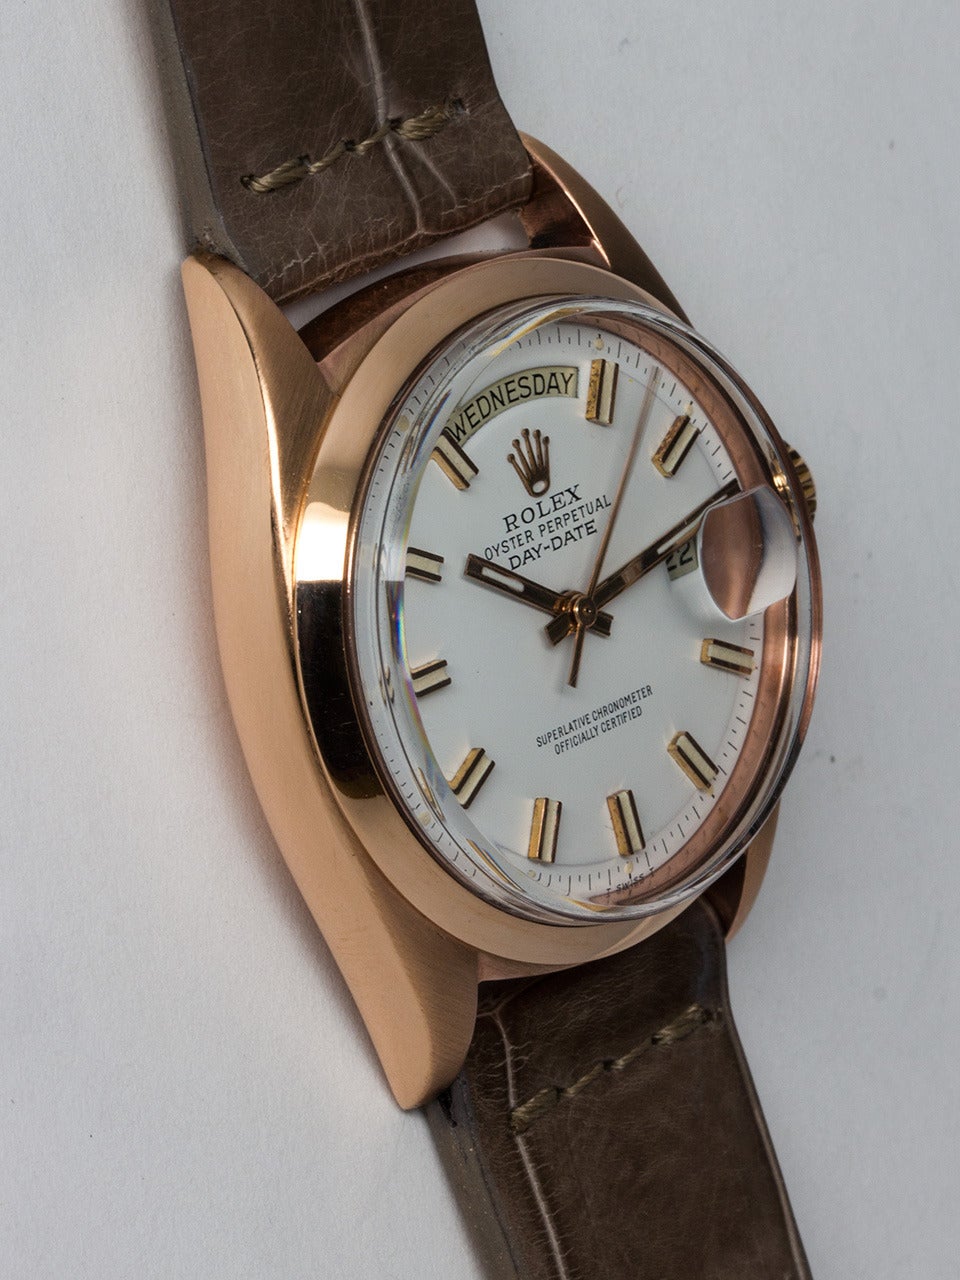 Rolex 18K Rose Gold Day-Date Wristwatch ref 1803 serial number 2.8 million circa 1971. 36mm diameter full size man's model with smooth dome bezel and acrylic crystal. Beautifully restored white dial with pink applied indexes and hands. Powered by